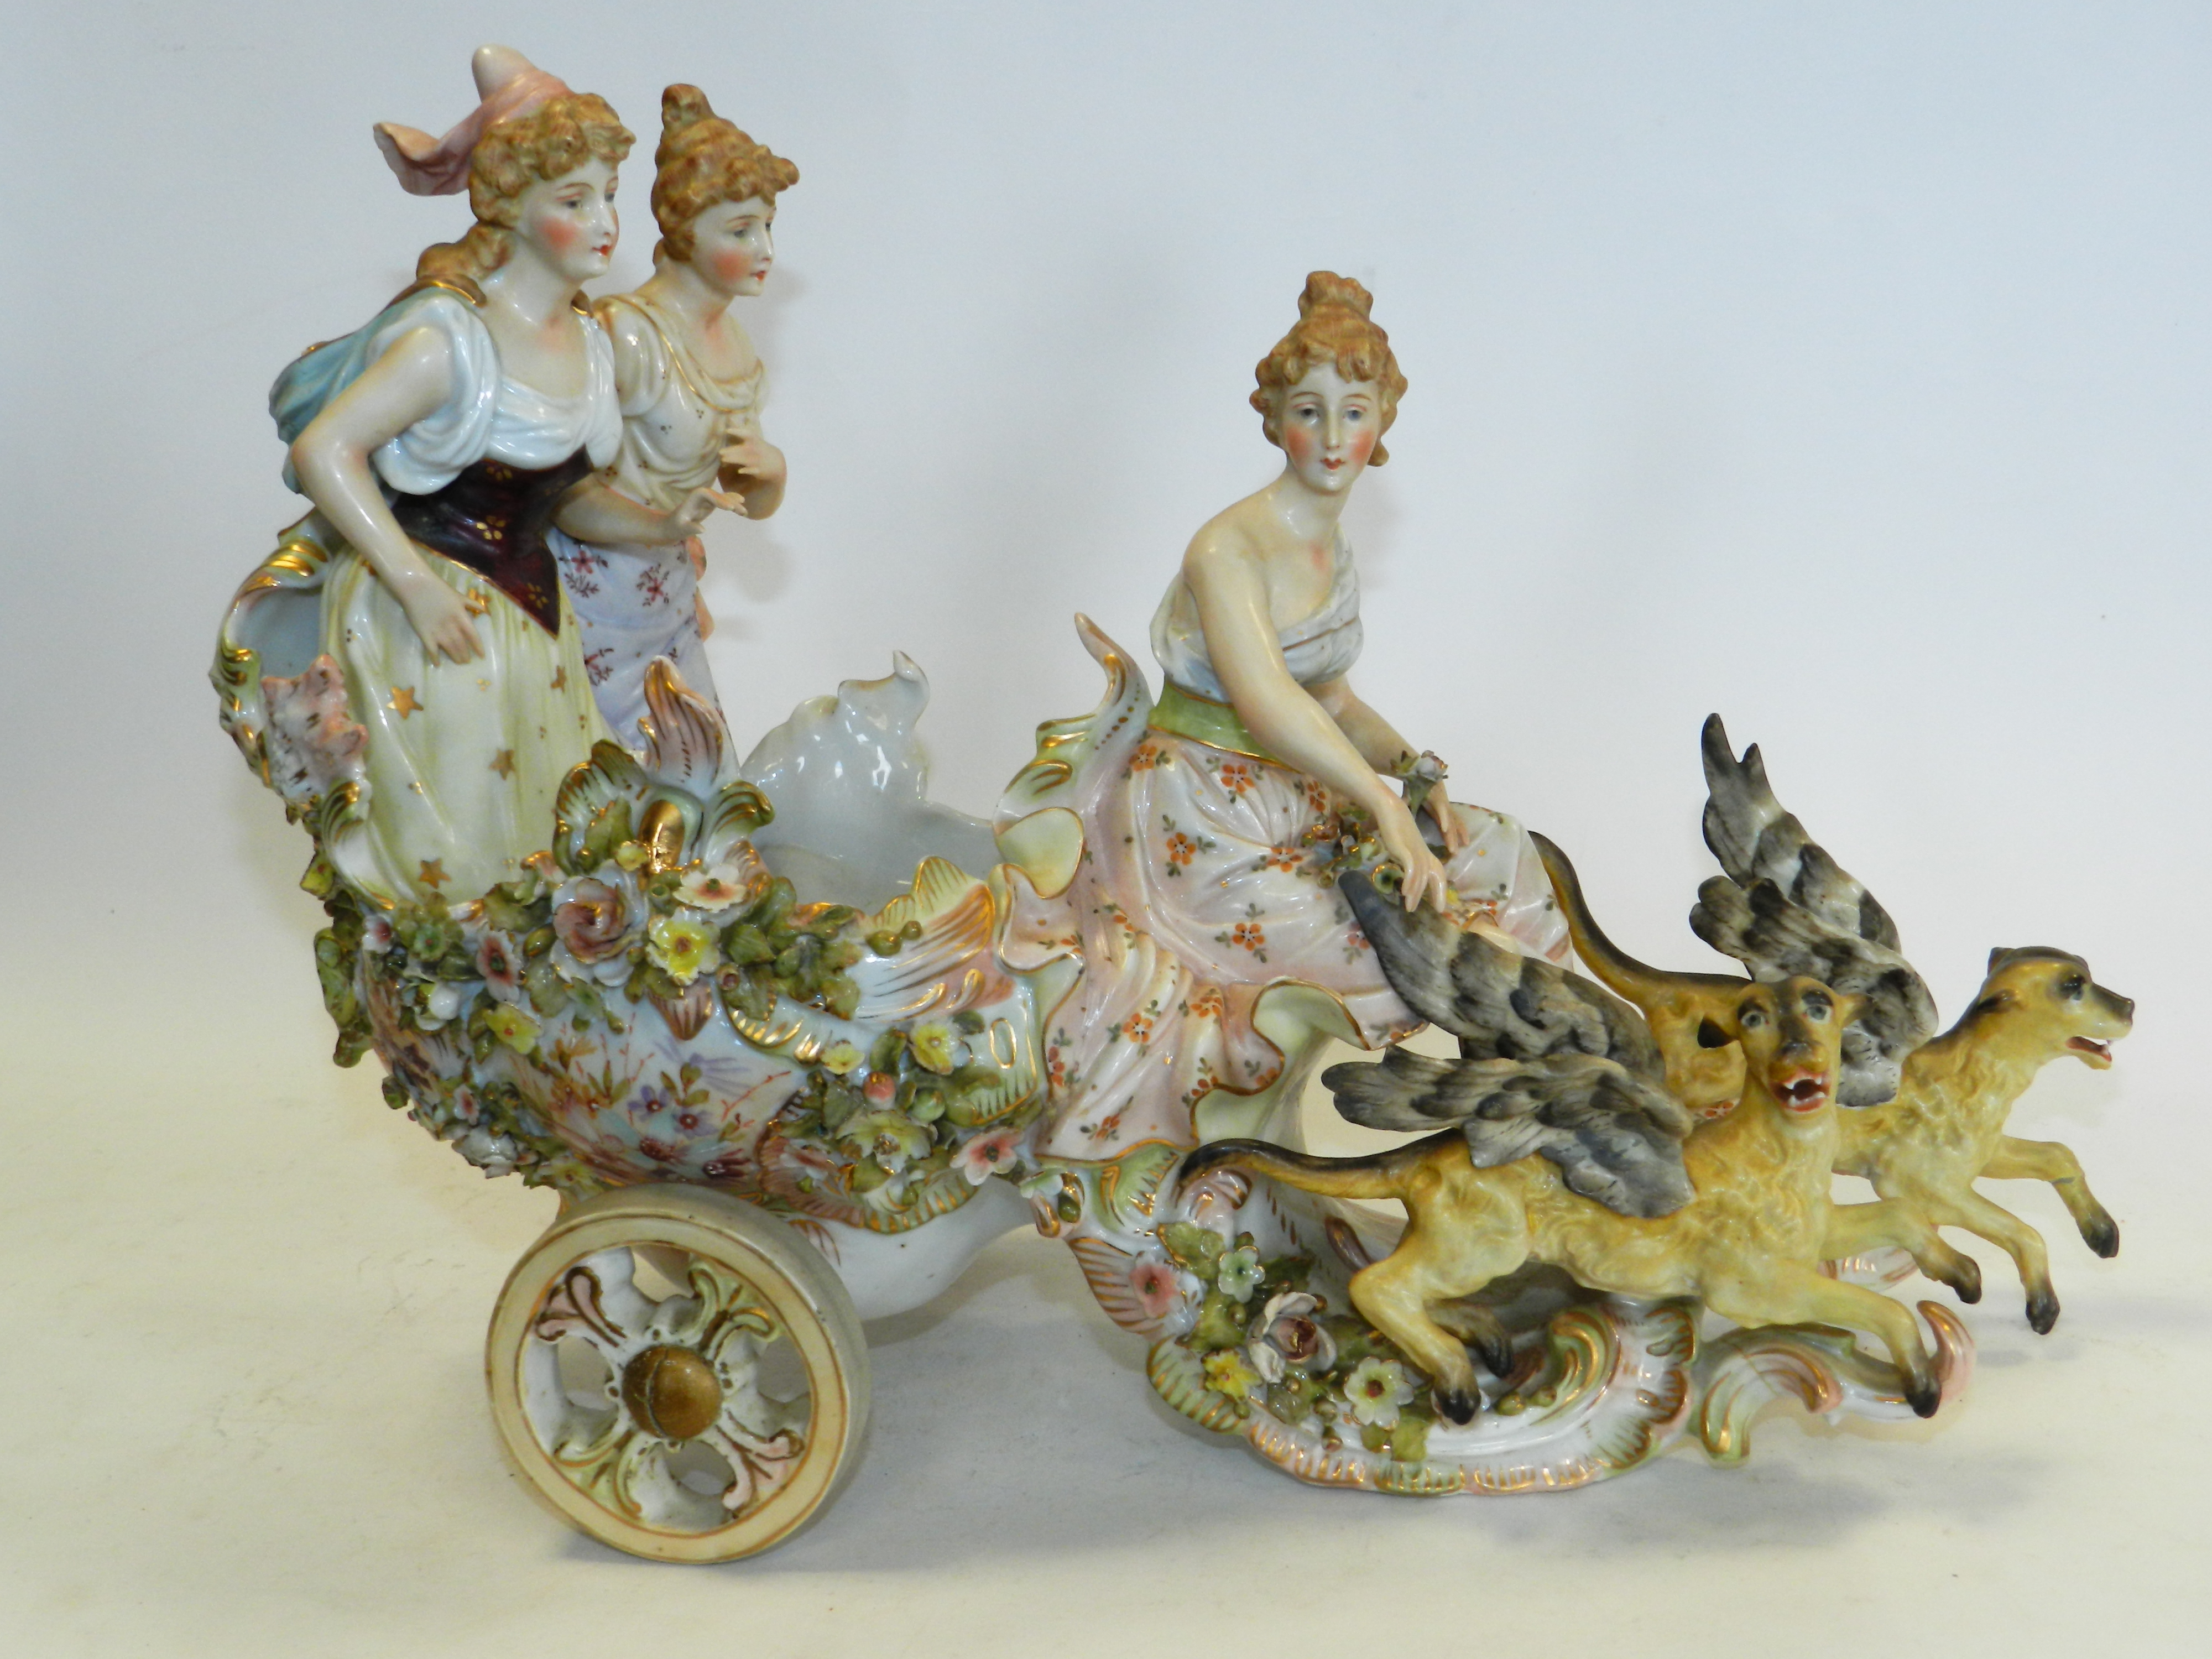 A Sitzendorf figural group of three ladies riding a chariot, pulled by two winged beasts (a.